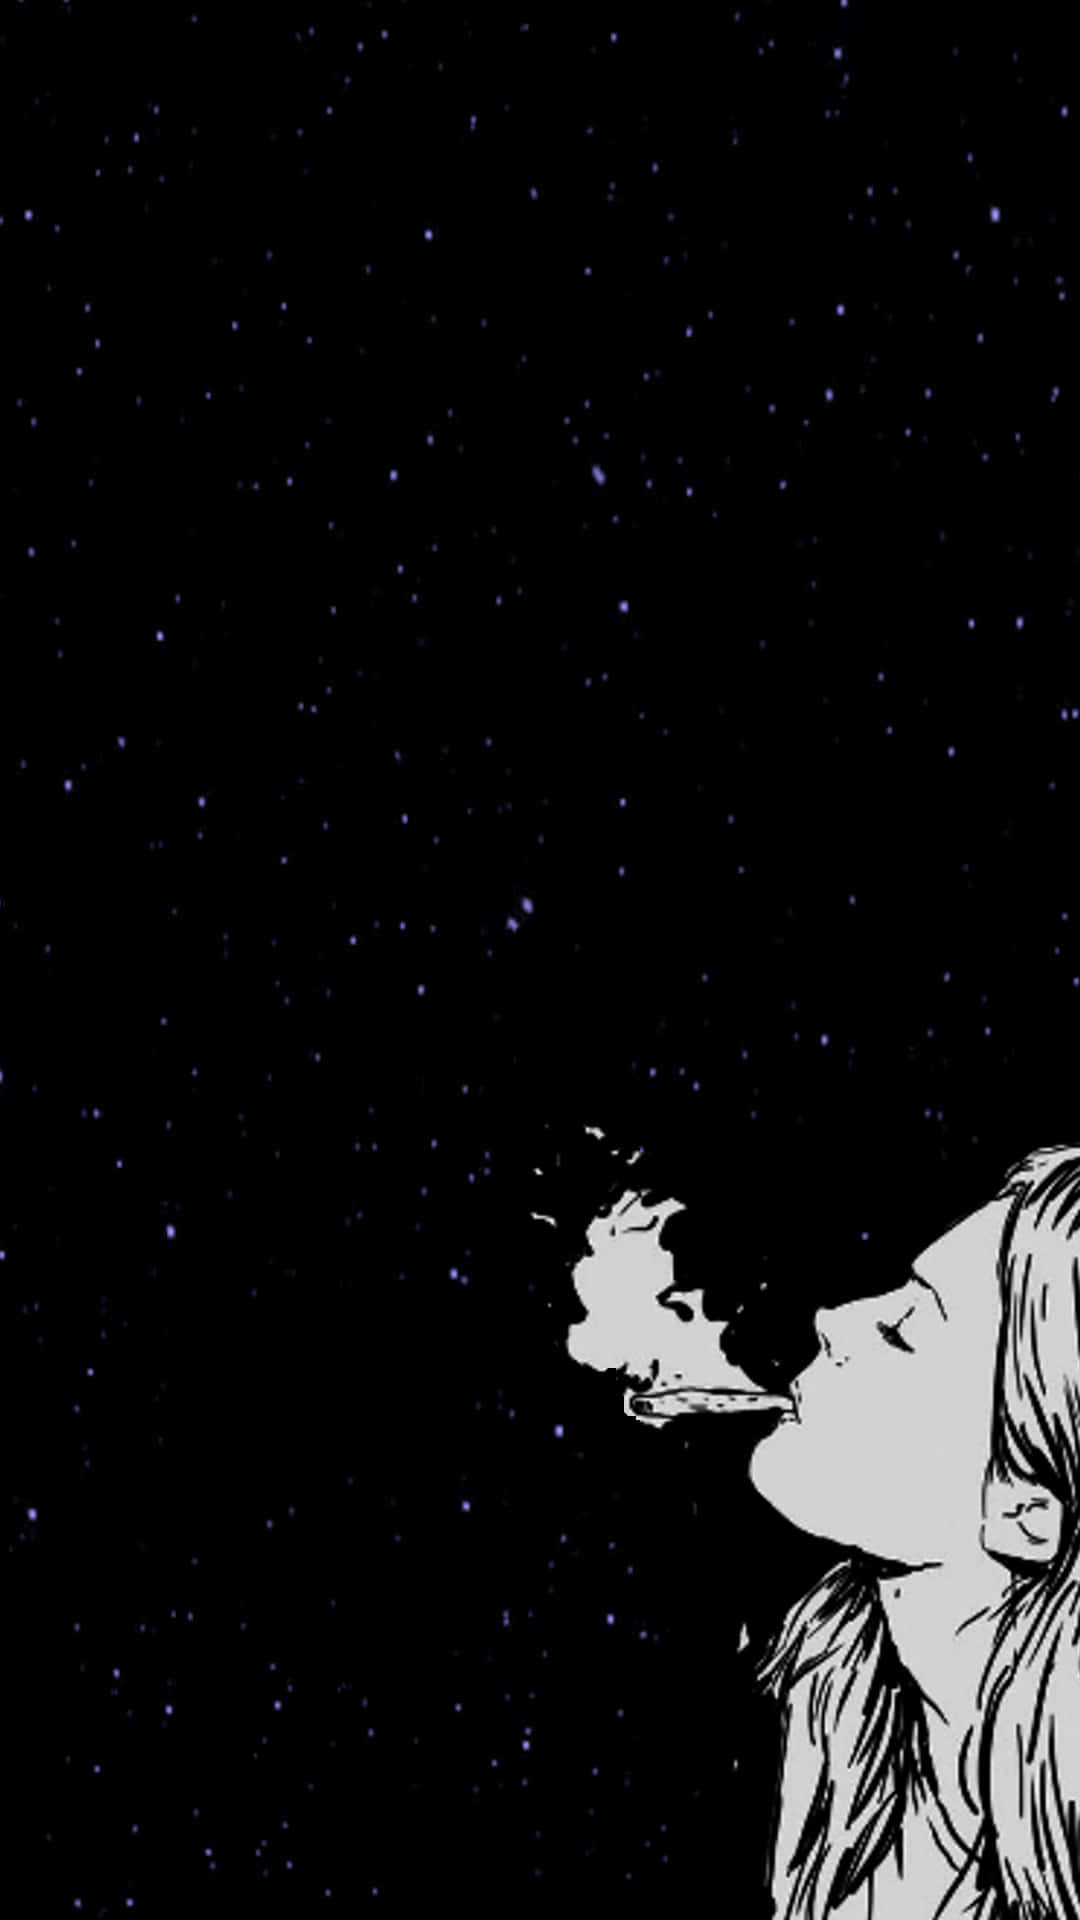 Woman With Smoking Addiction In Starry Background Wallpaper